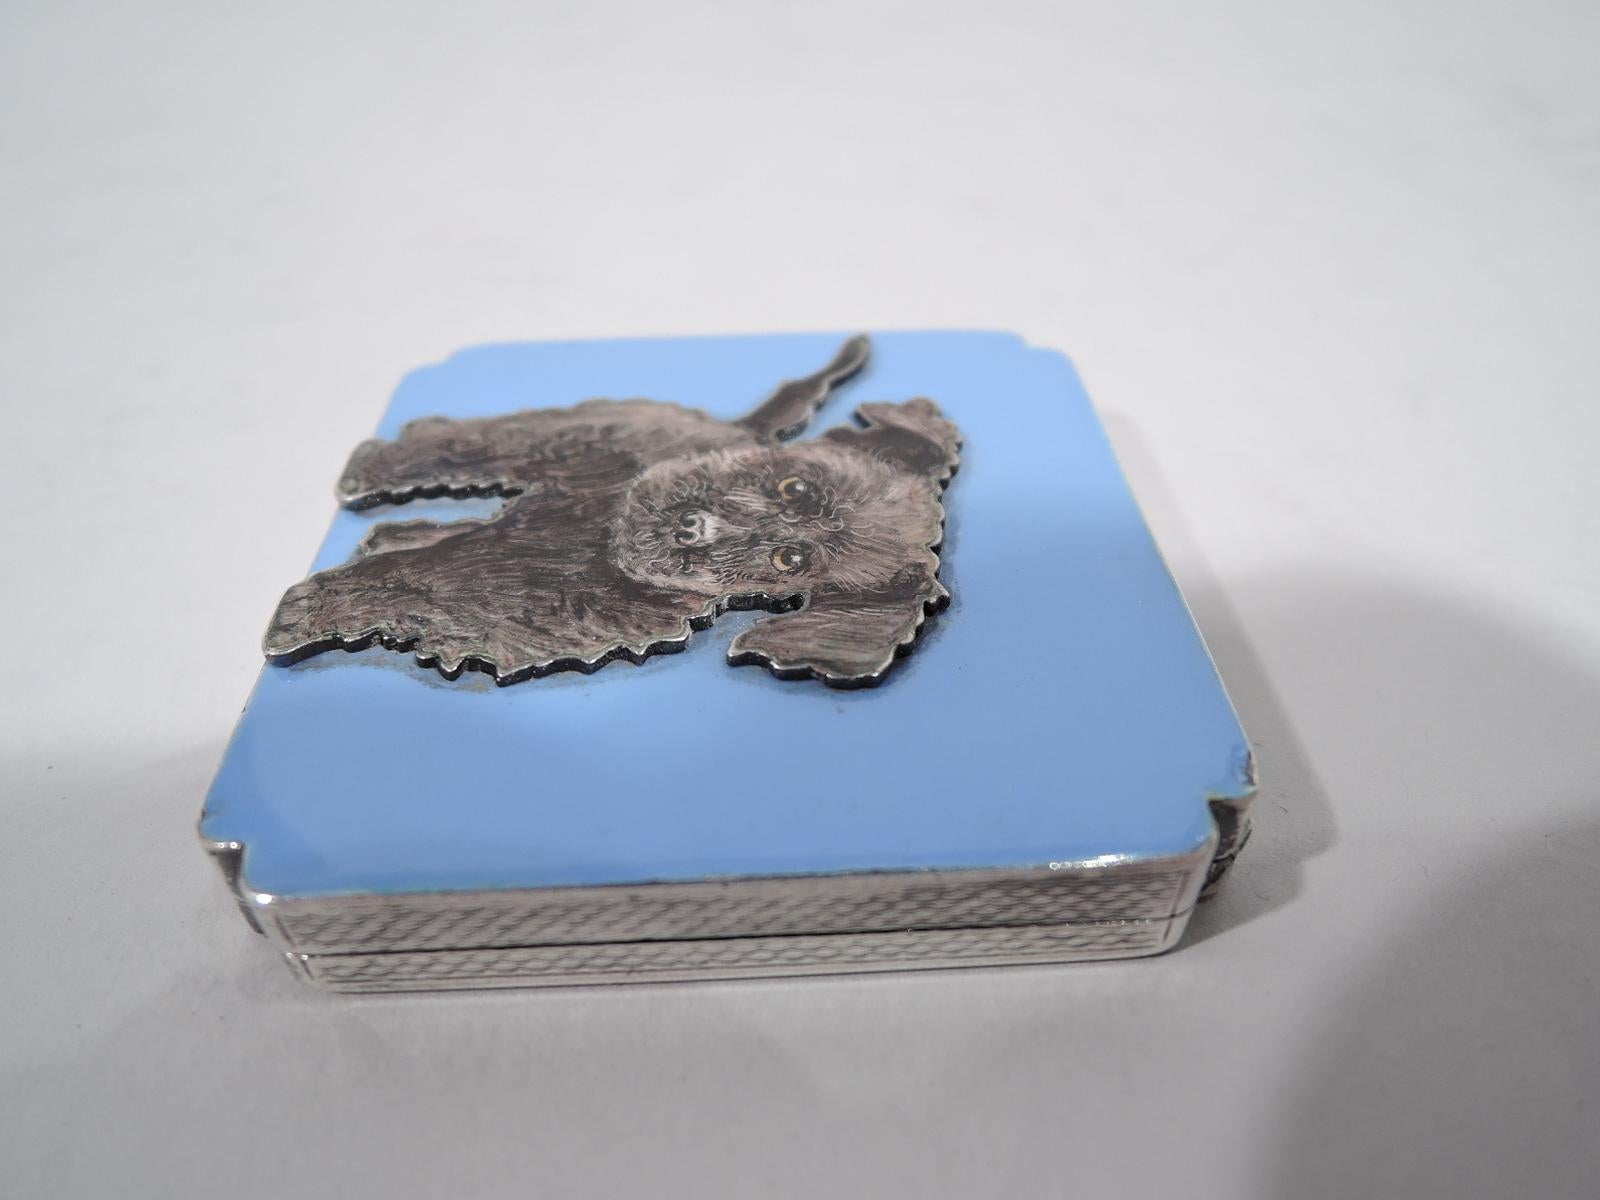 Art Deco sterling silver and enamel compact, ca 1920. Square and hinged with lobed corners. On cover a black wiggly, wiry terrier quivering with love is cutout and applied to a solid lilac purple ground. Back and sides have engine-turned wave